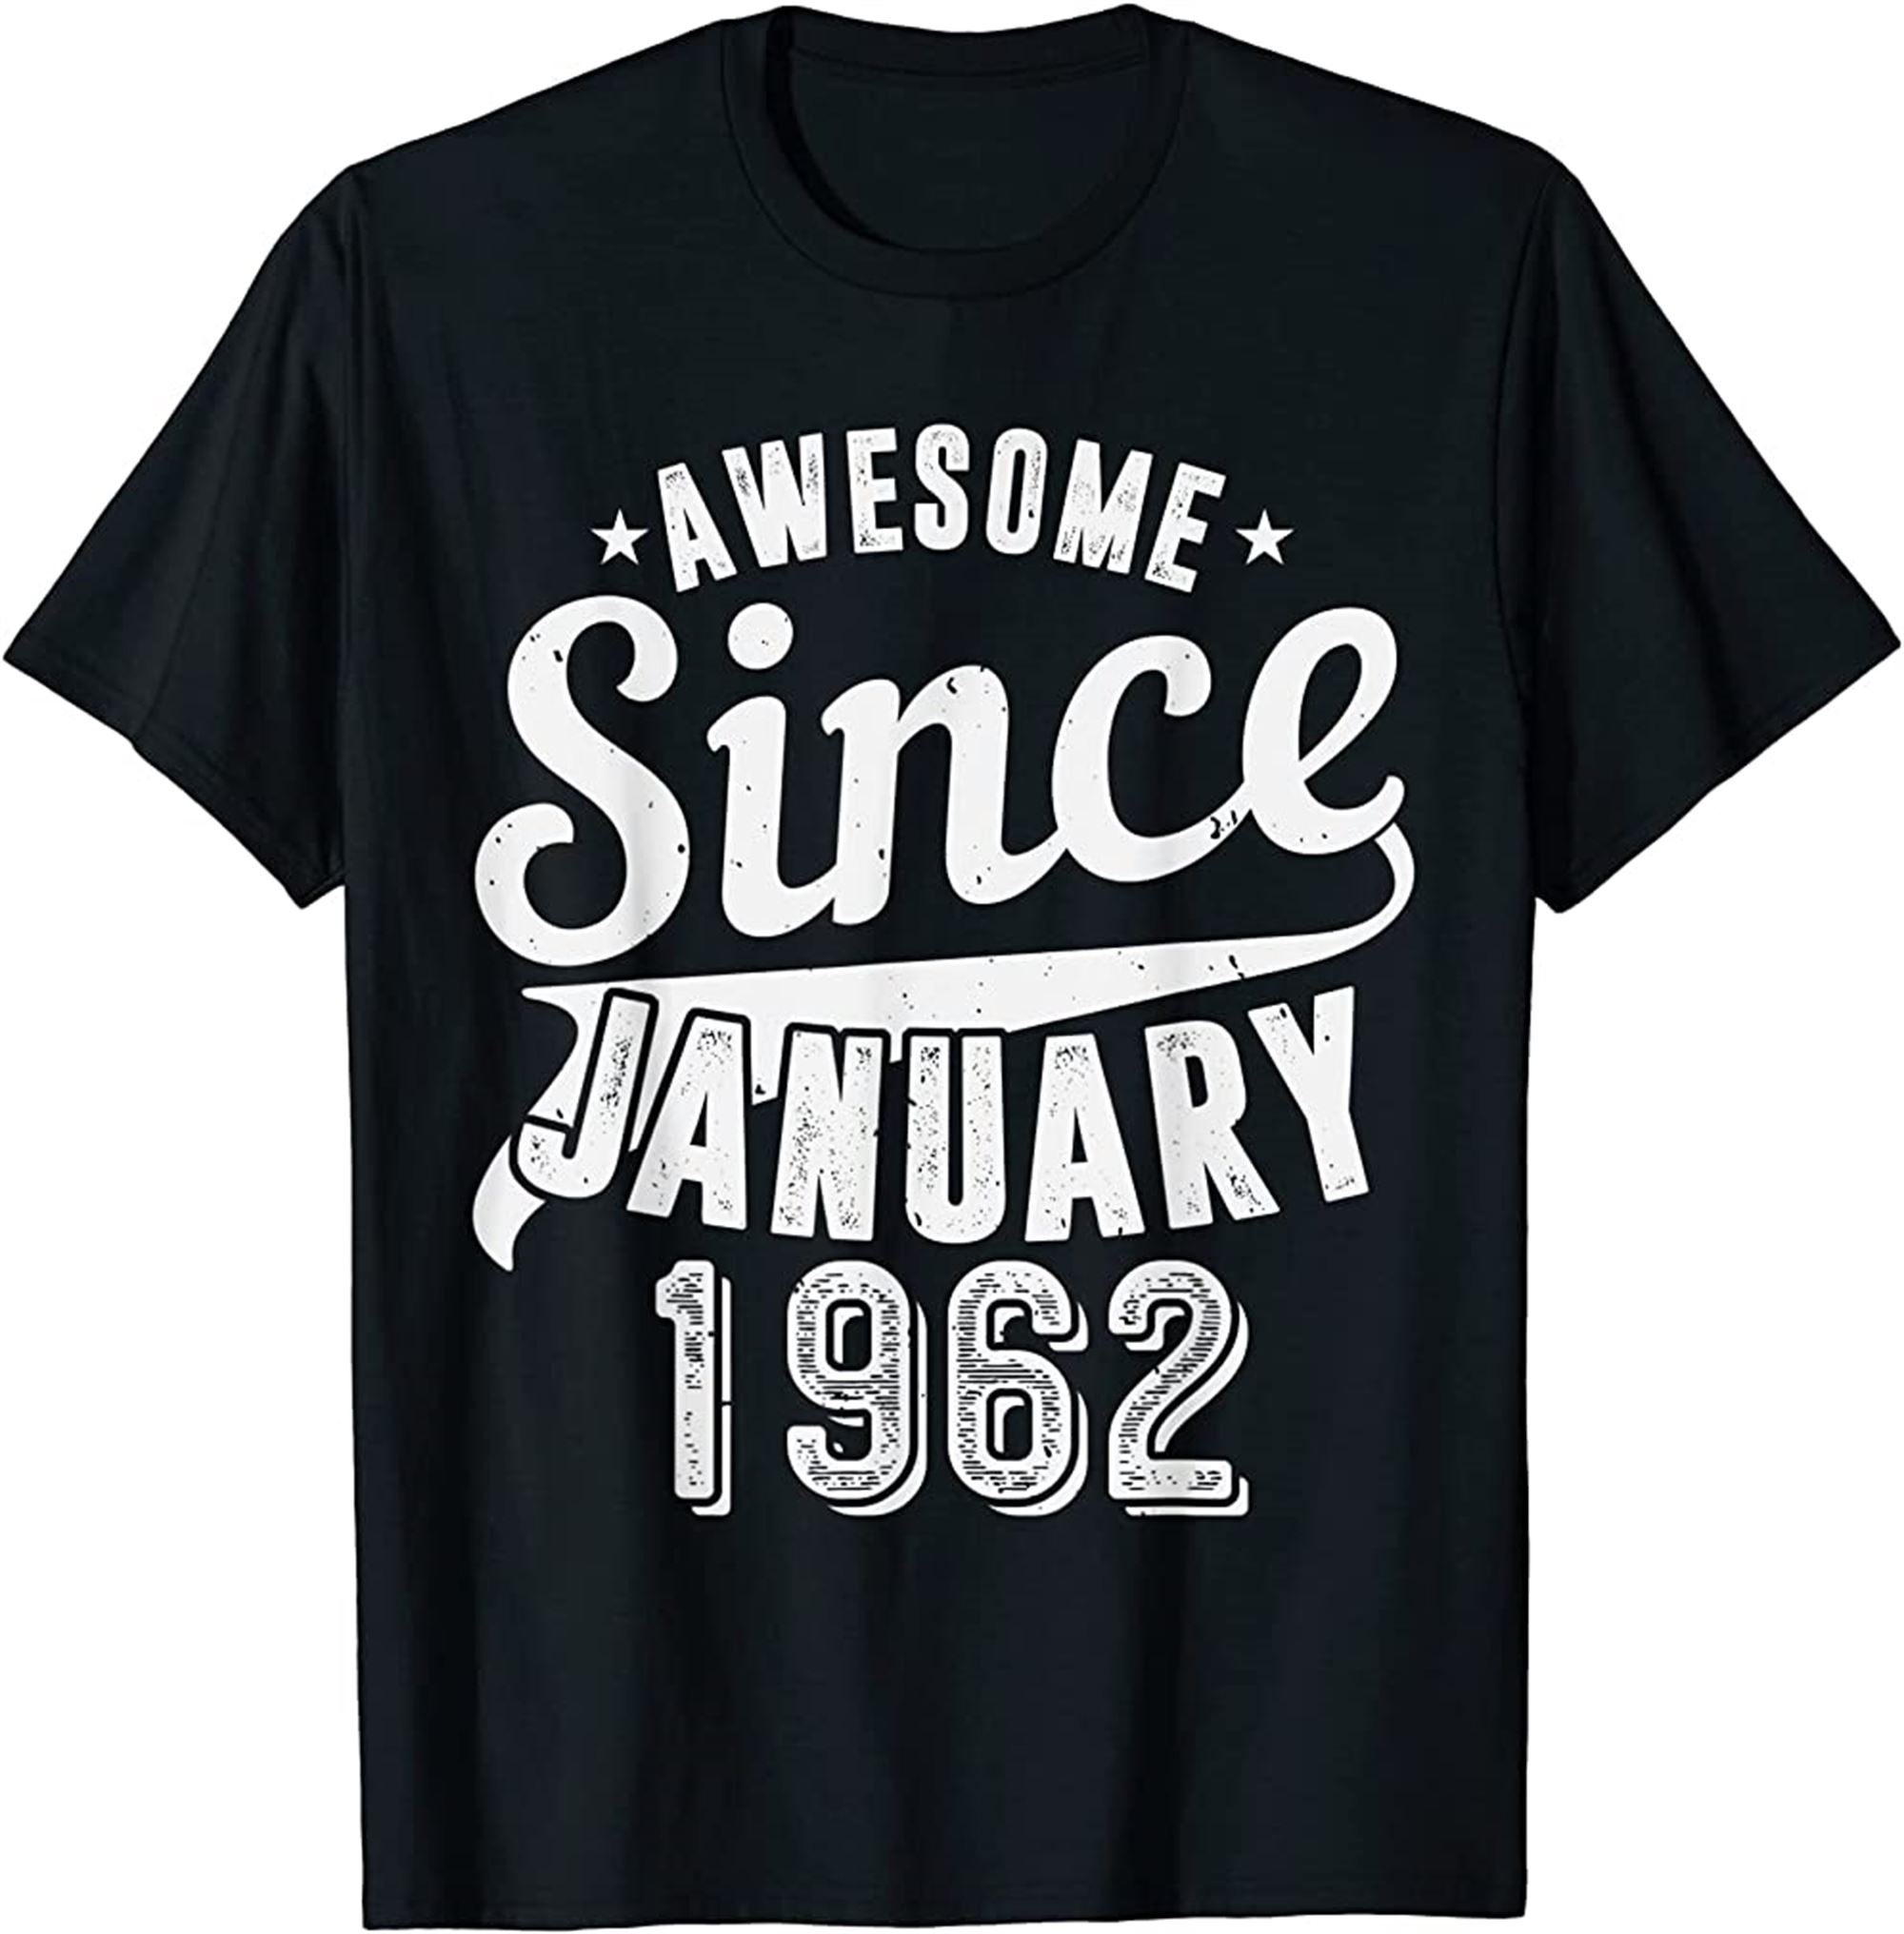 Vintage 1962 Awesome Since January Happy My 60th Birthday T-shirt Full Size Up To 5xl